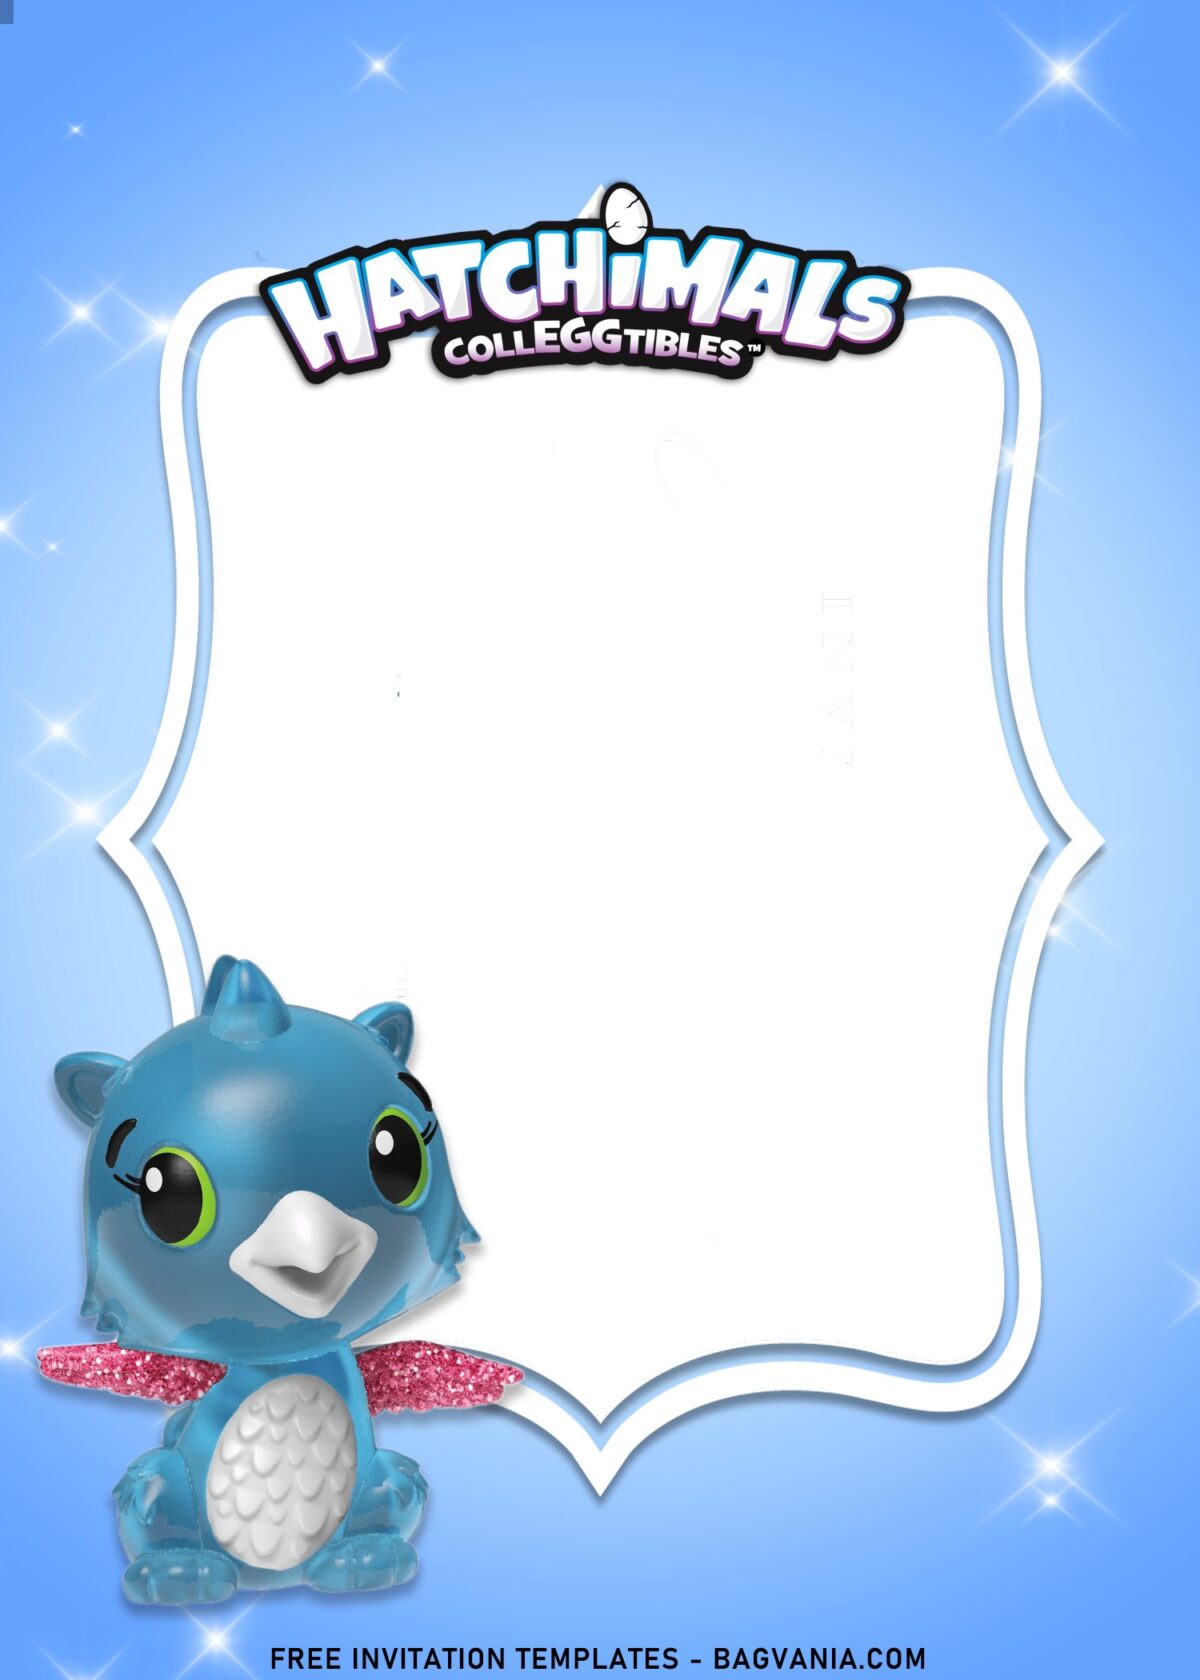 7+ Twinkly Cute Hatchimals Birthday Invitation Templates with adorable background and white sparkles